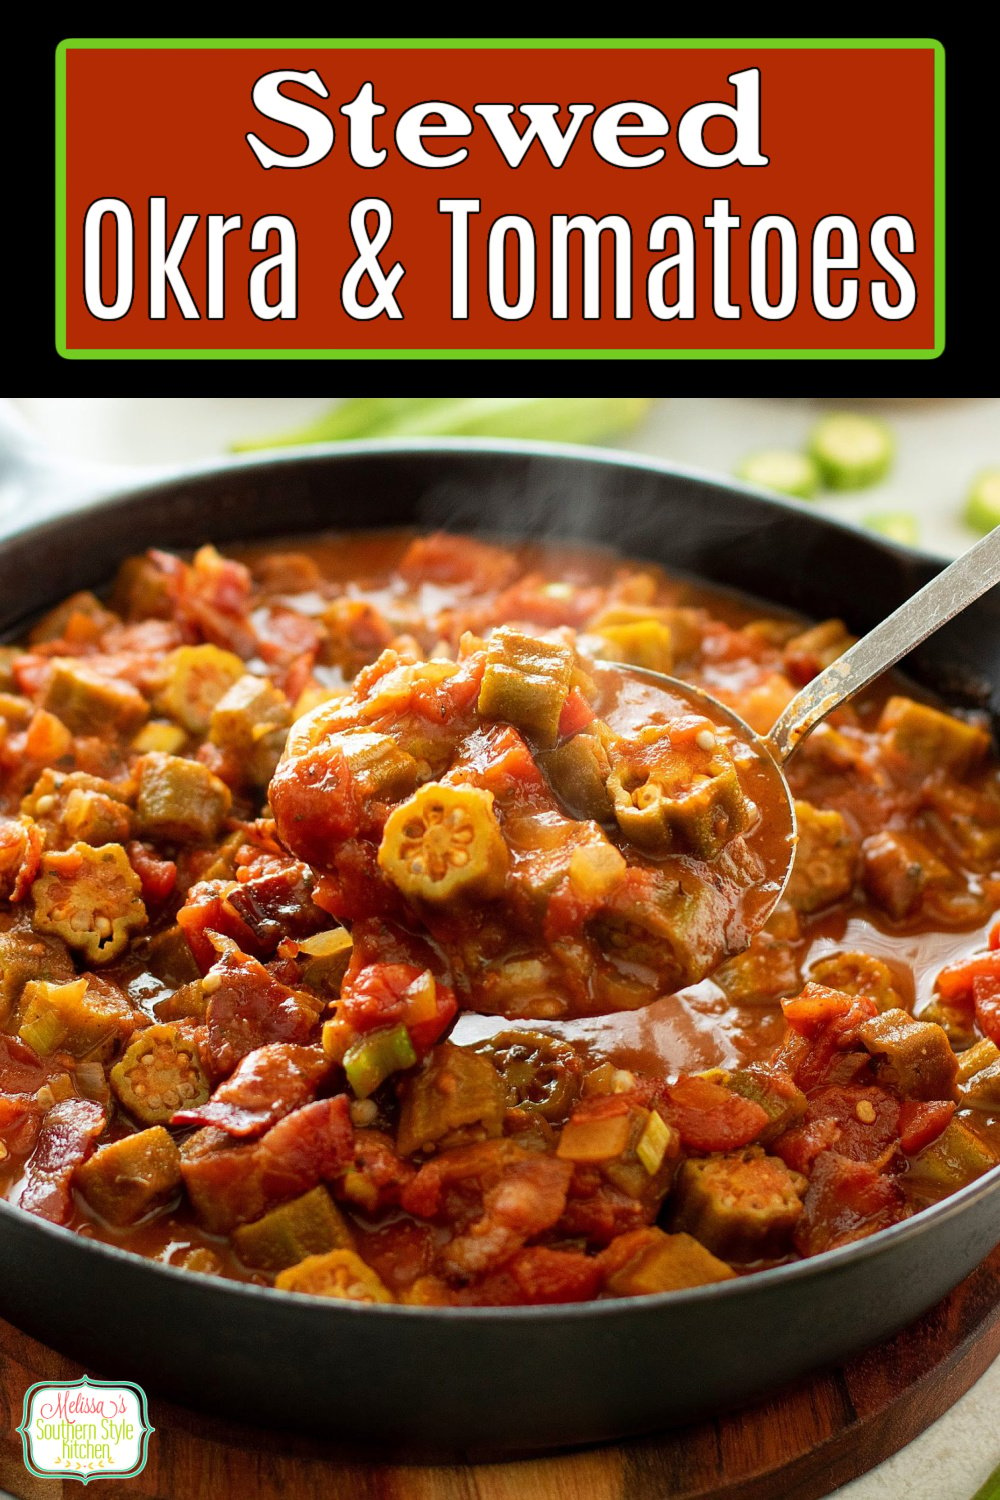 This Southern Stewed Okra with Tomatoes recipe is a classic summertime side dish to make. It works well using frozen okra, too! #stewedokra #bestokrarecipes #okra #Southernstewedokra #okrawithtomatoes #strewedokrawithtomatoes #easyokrarecipe via @melissasssk